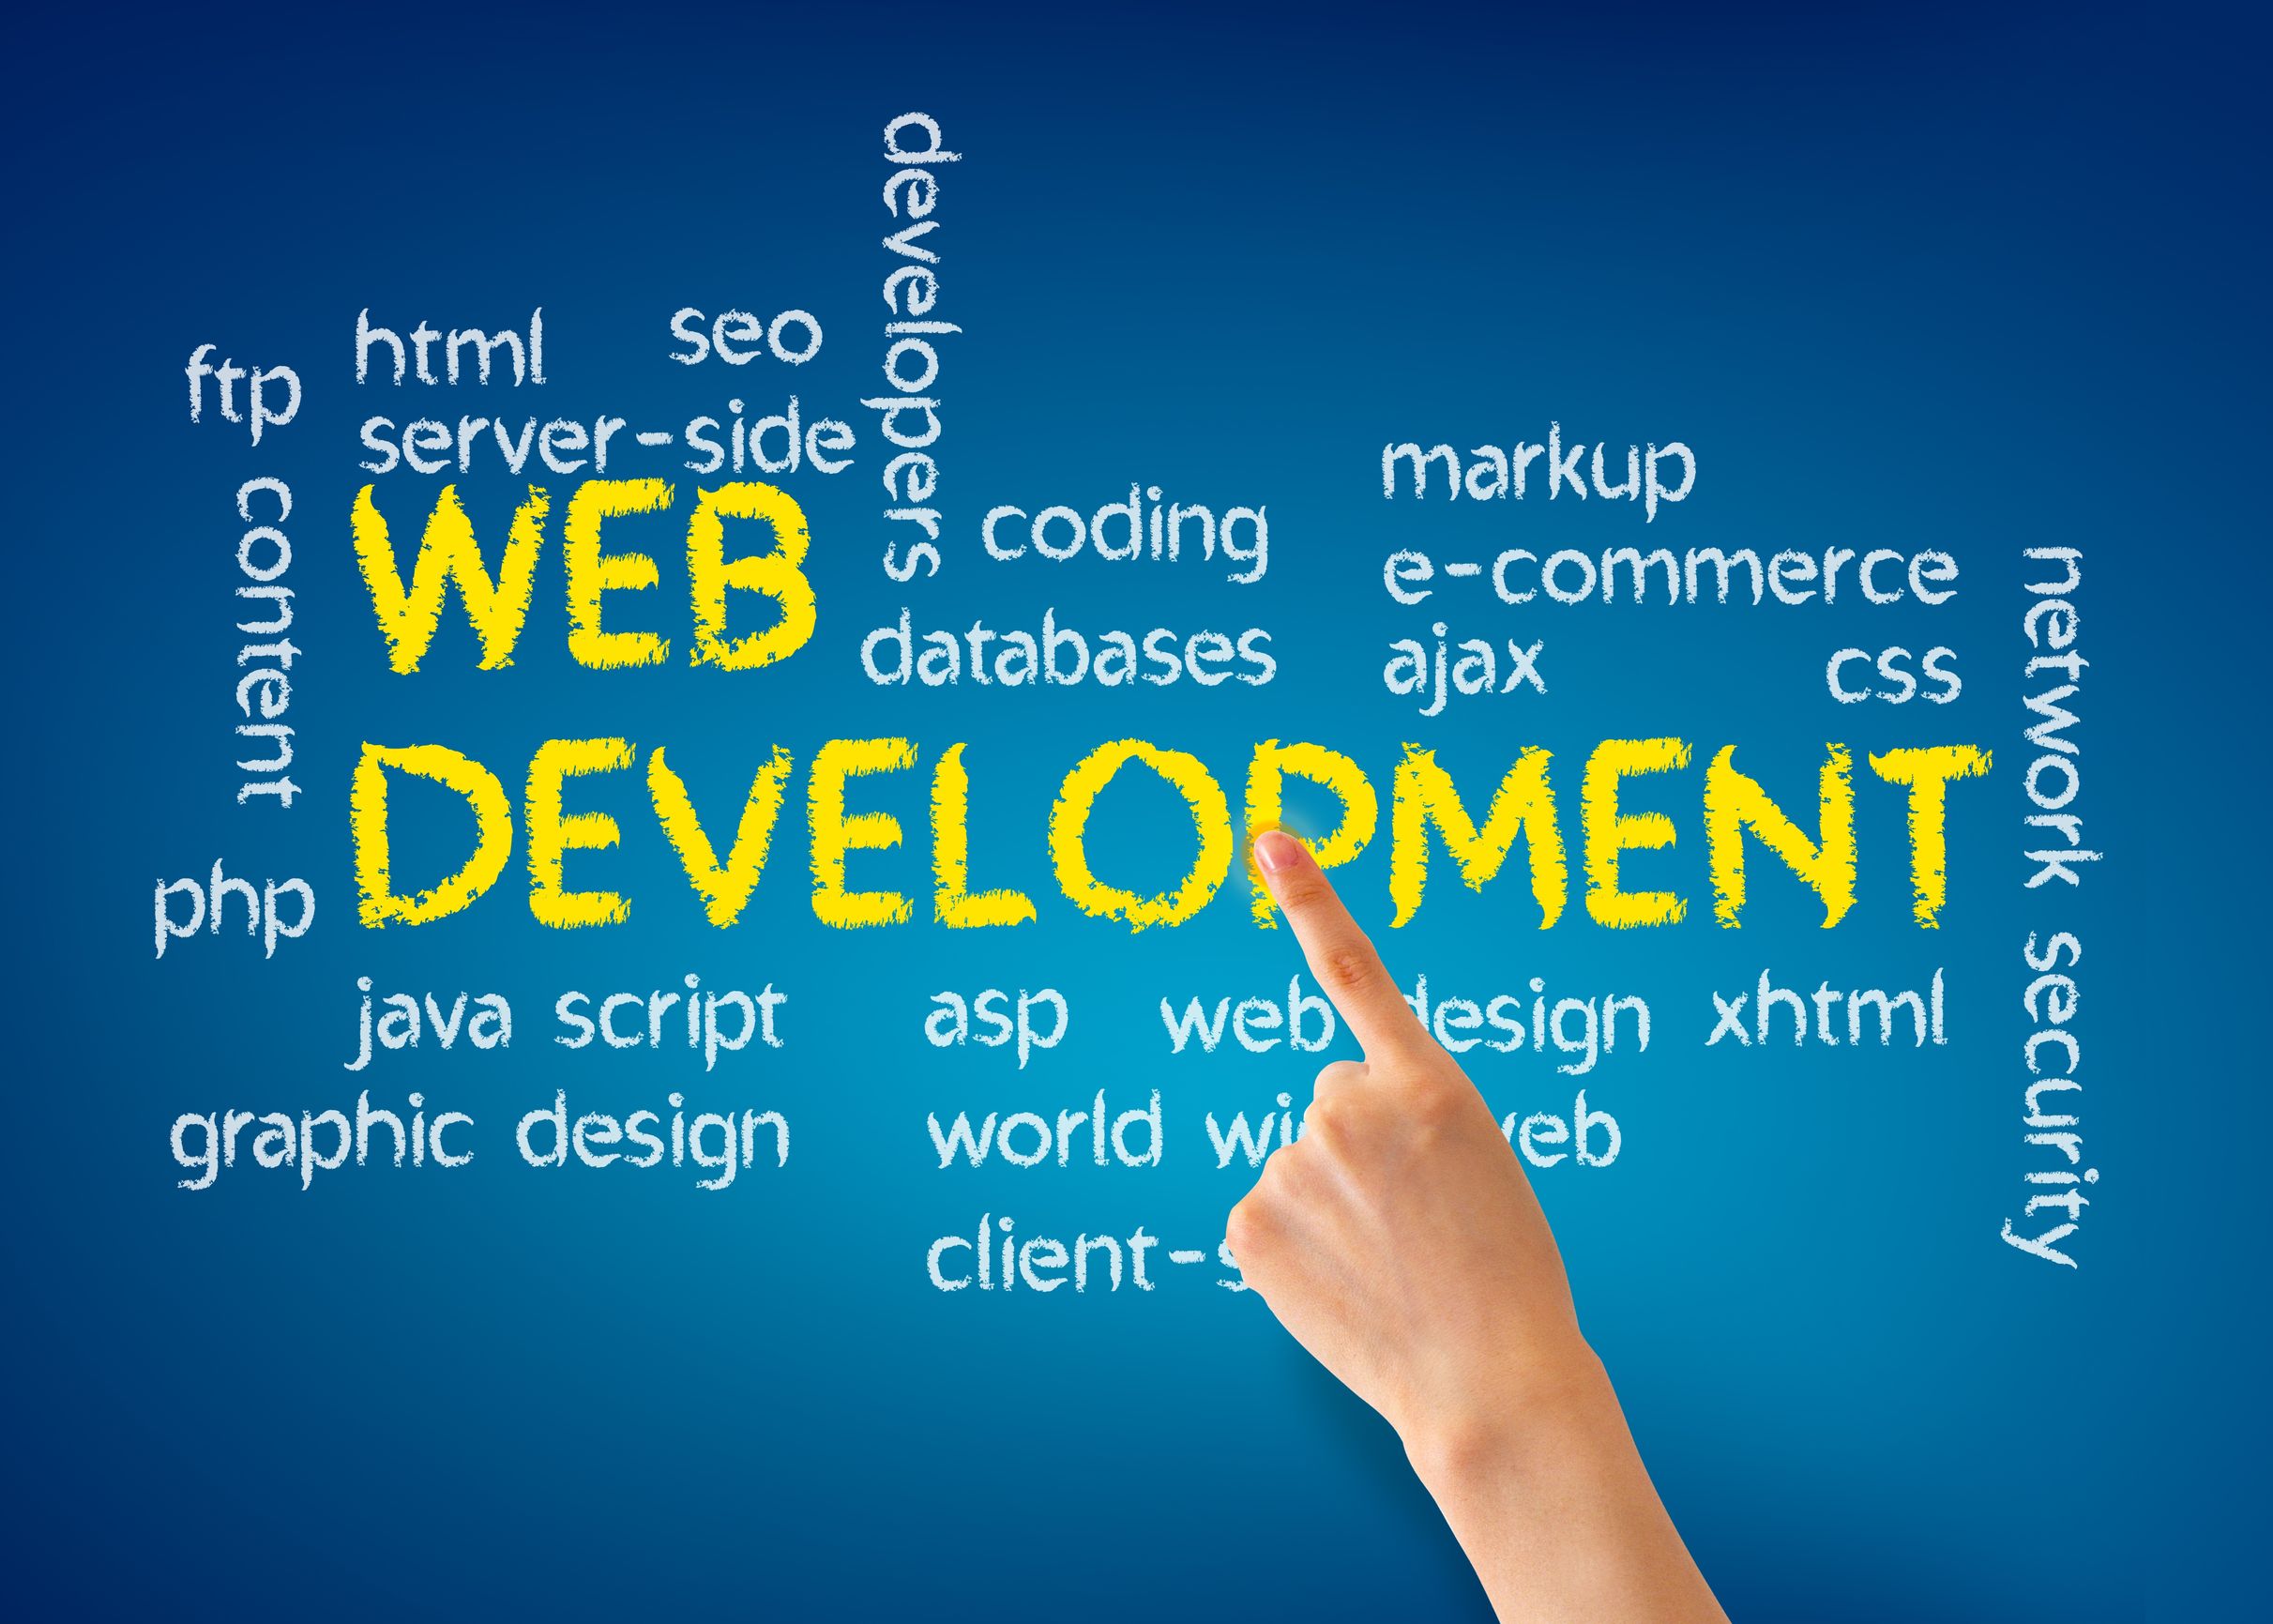 How Can Website Design in Naples, FL Help You?